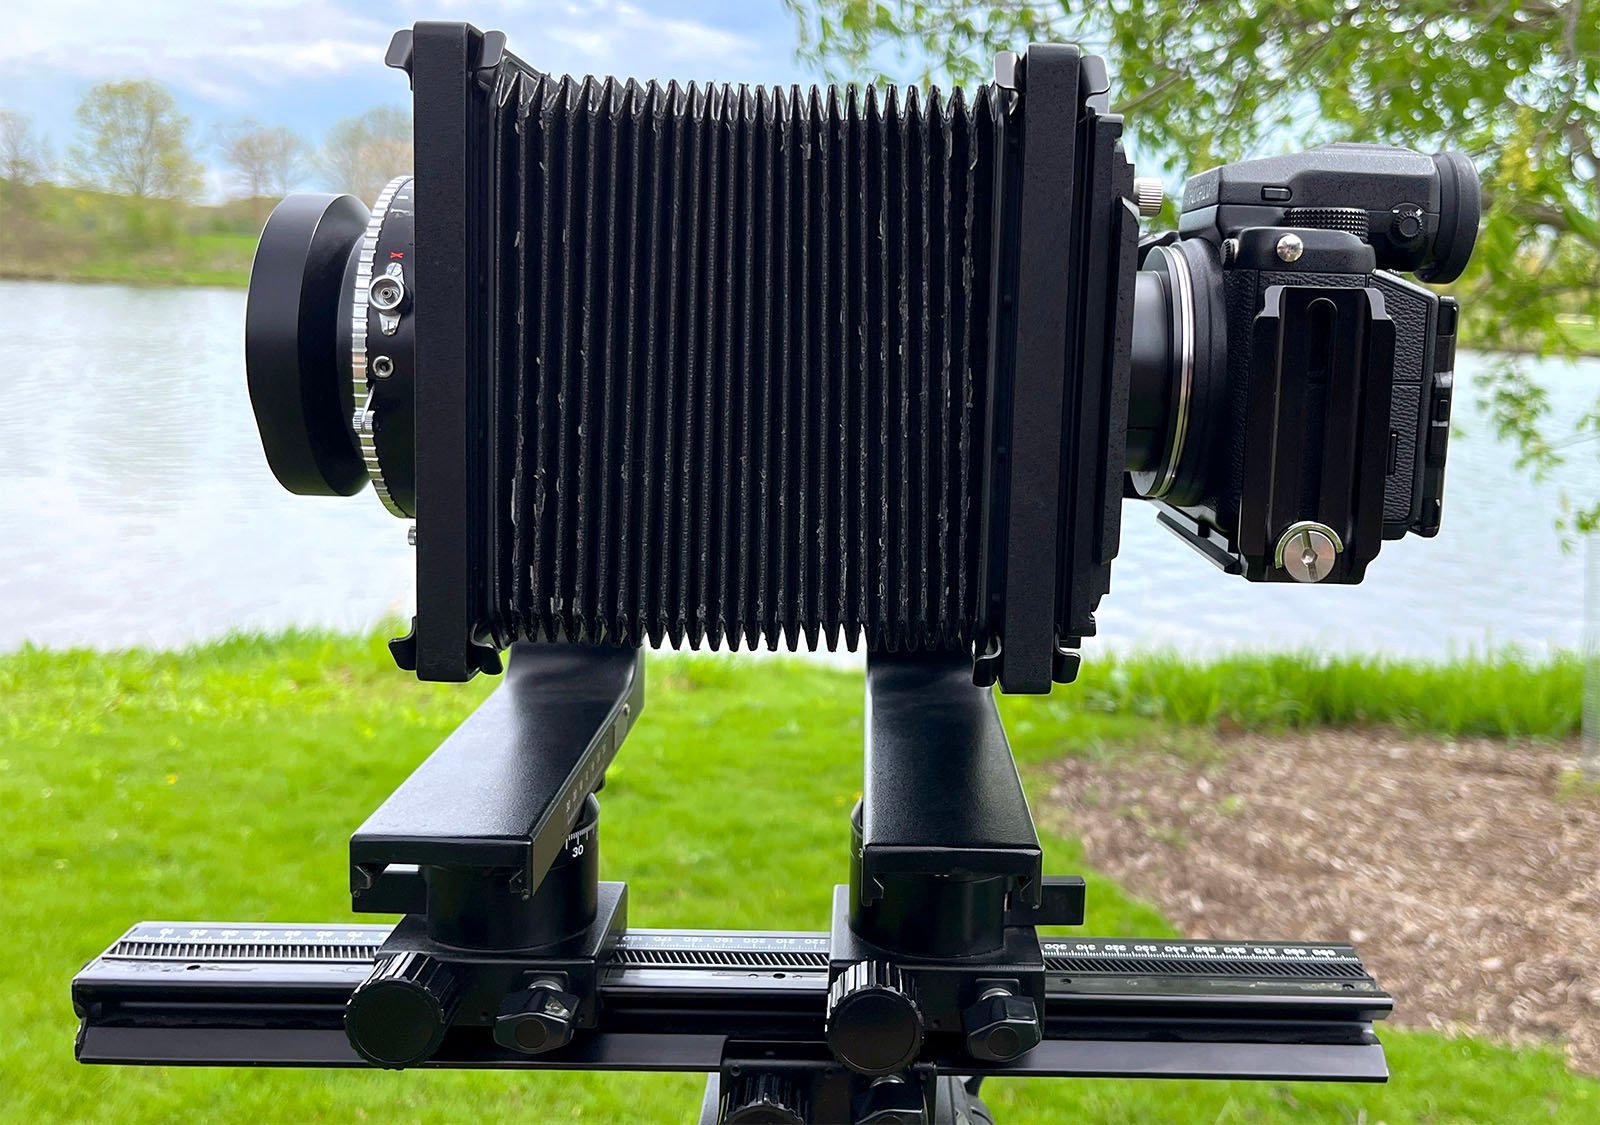 A large format camera mounted on a tripod, positioned outdoors with a scenic lake and lush trees in the background. the bellows of the camera are fully extended.